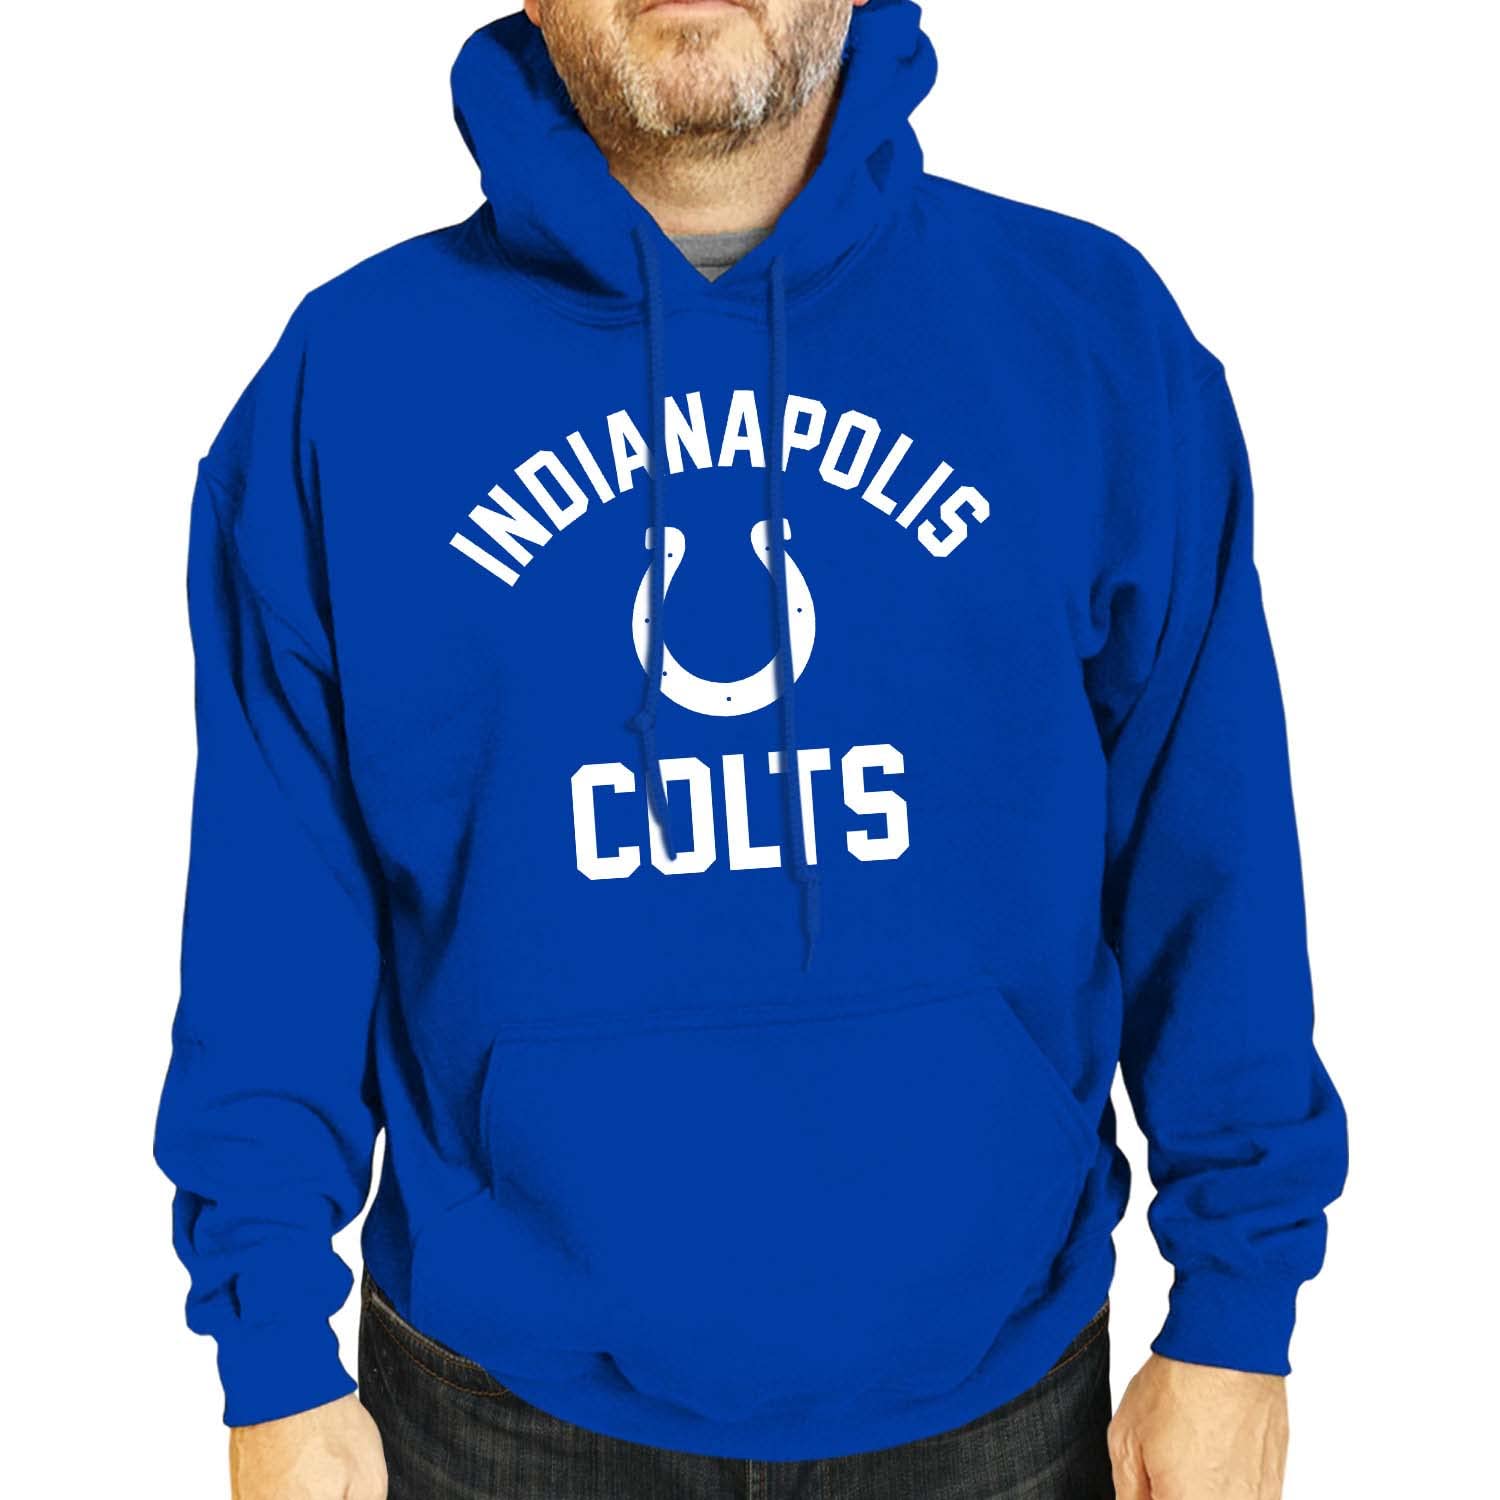 Team Fan Apparel NFL Adult Gameday Hooded Sweatshirt - Poly Fleece Cotton Blend - Stay Warm and Represent Your Team in Style (In